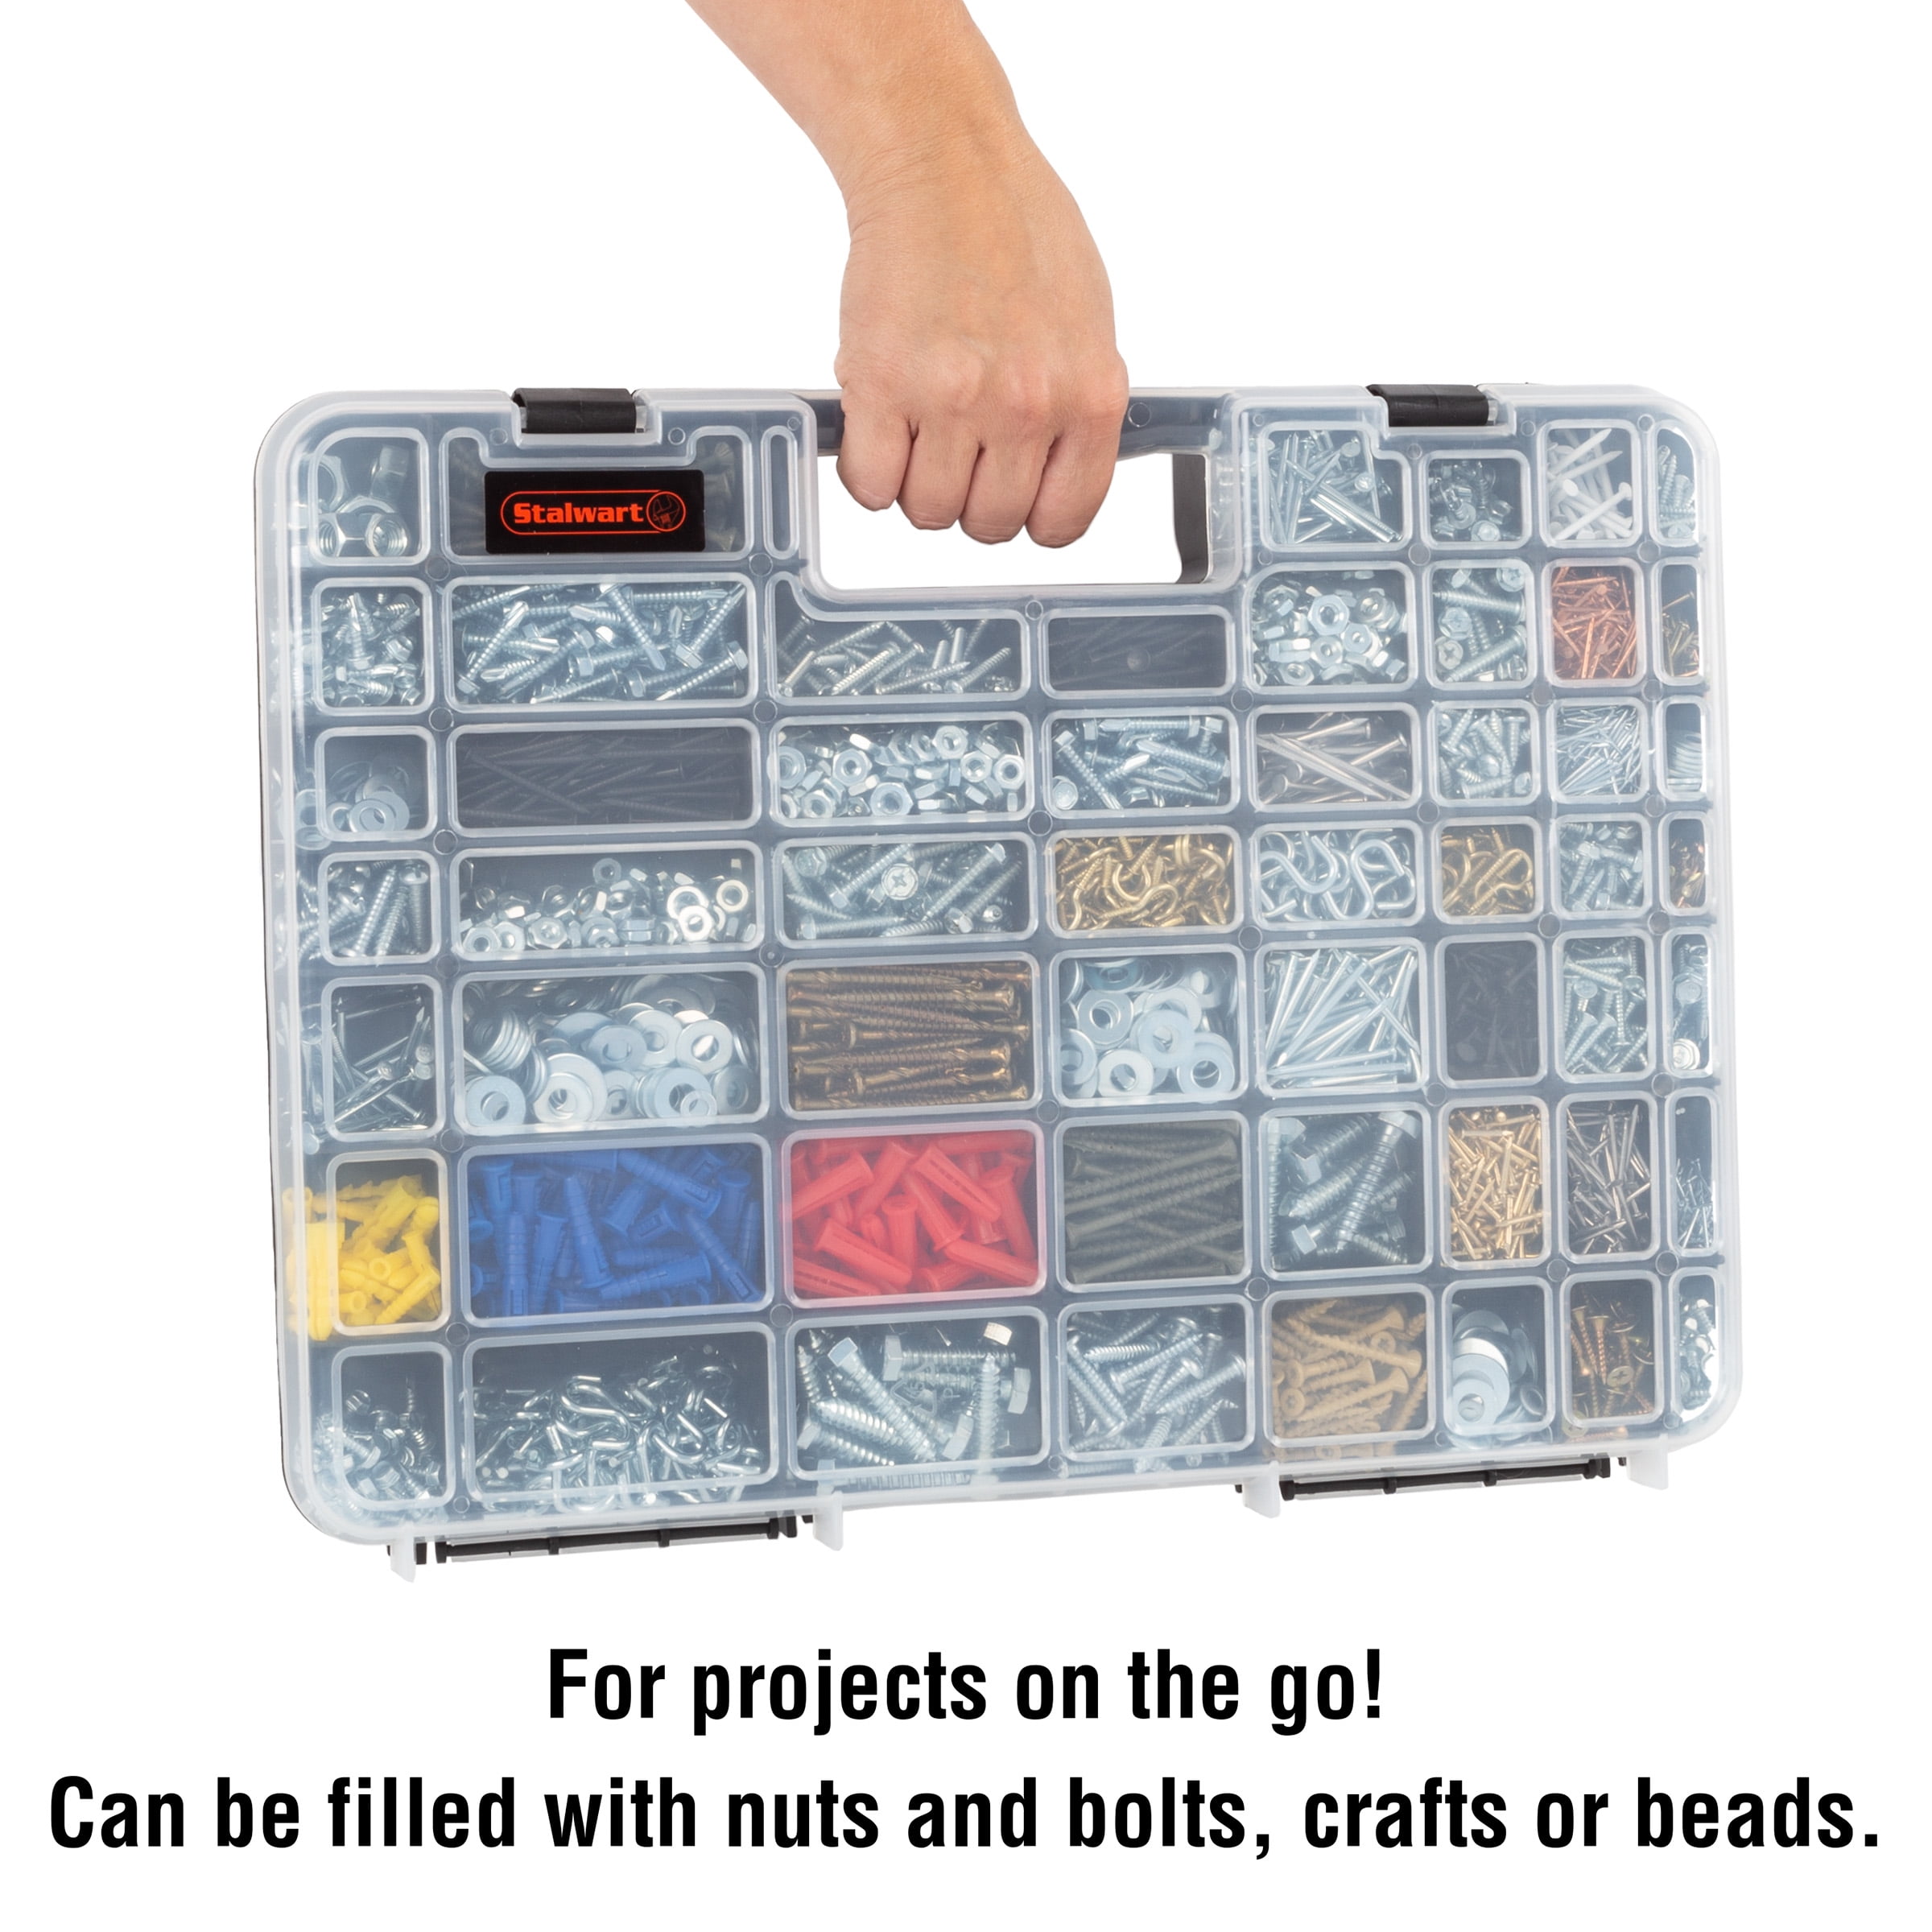 Portable Storage Case with Secure Locks and 14 Small Bin Compartments for Hardware Nails Bolts Jewelry and More by Stalwart Screws Beads Nuts 